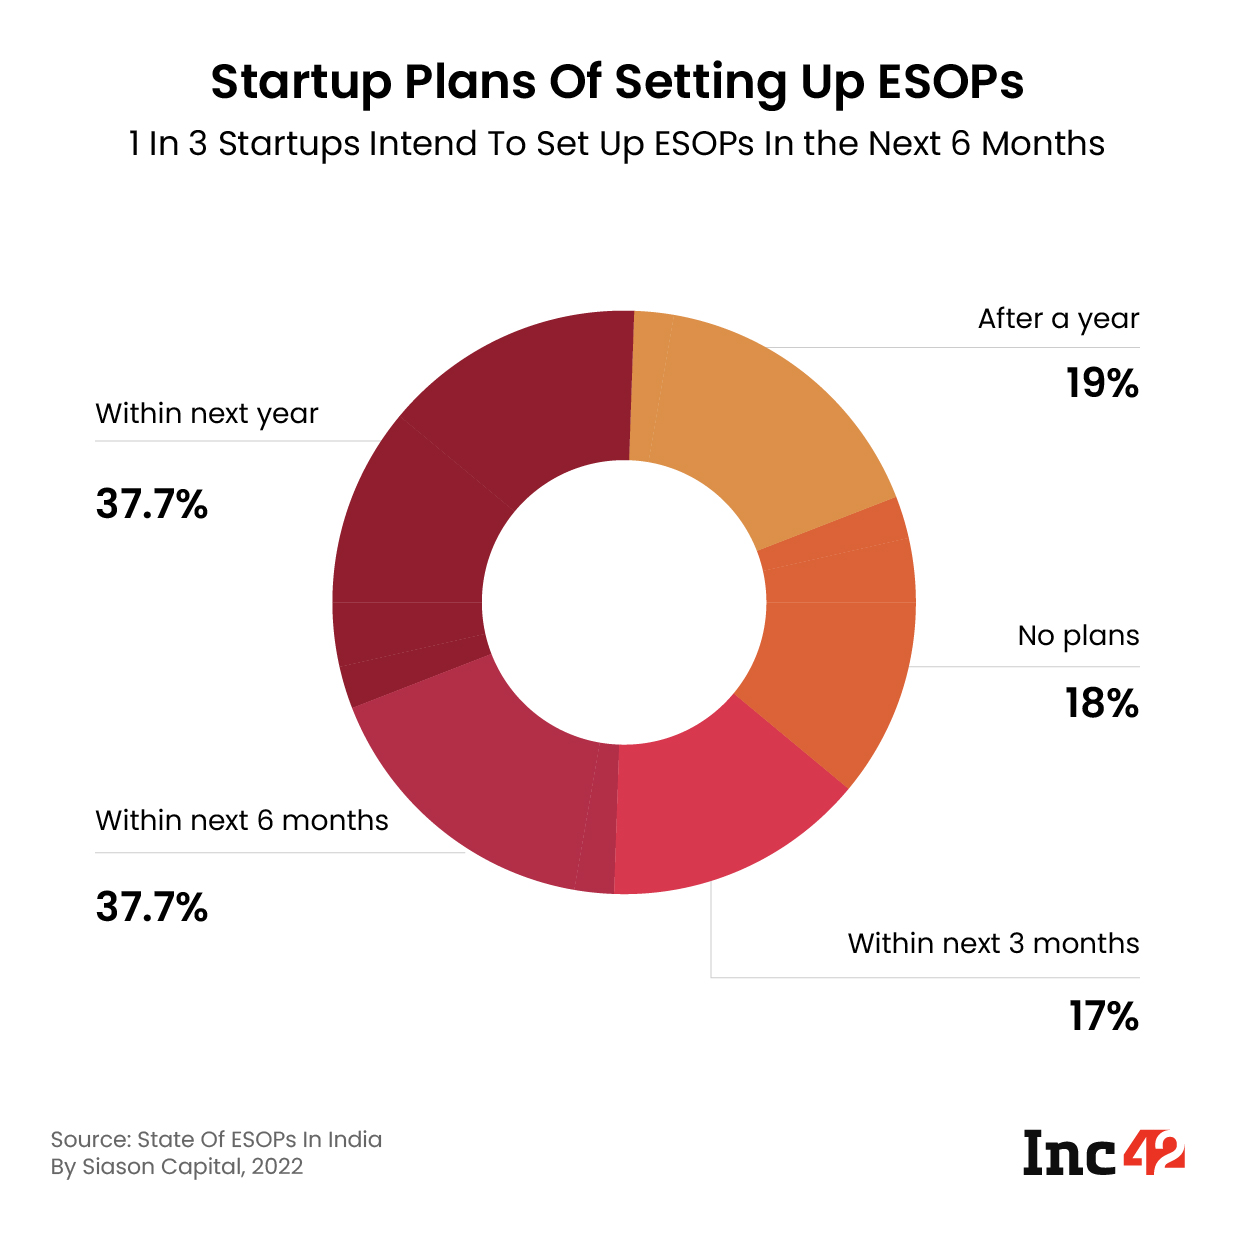 Startup plans of setting up ESOPs